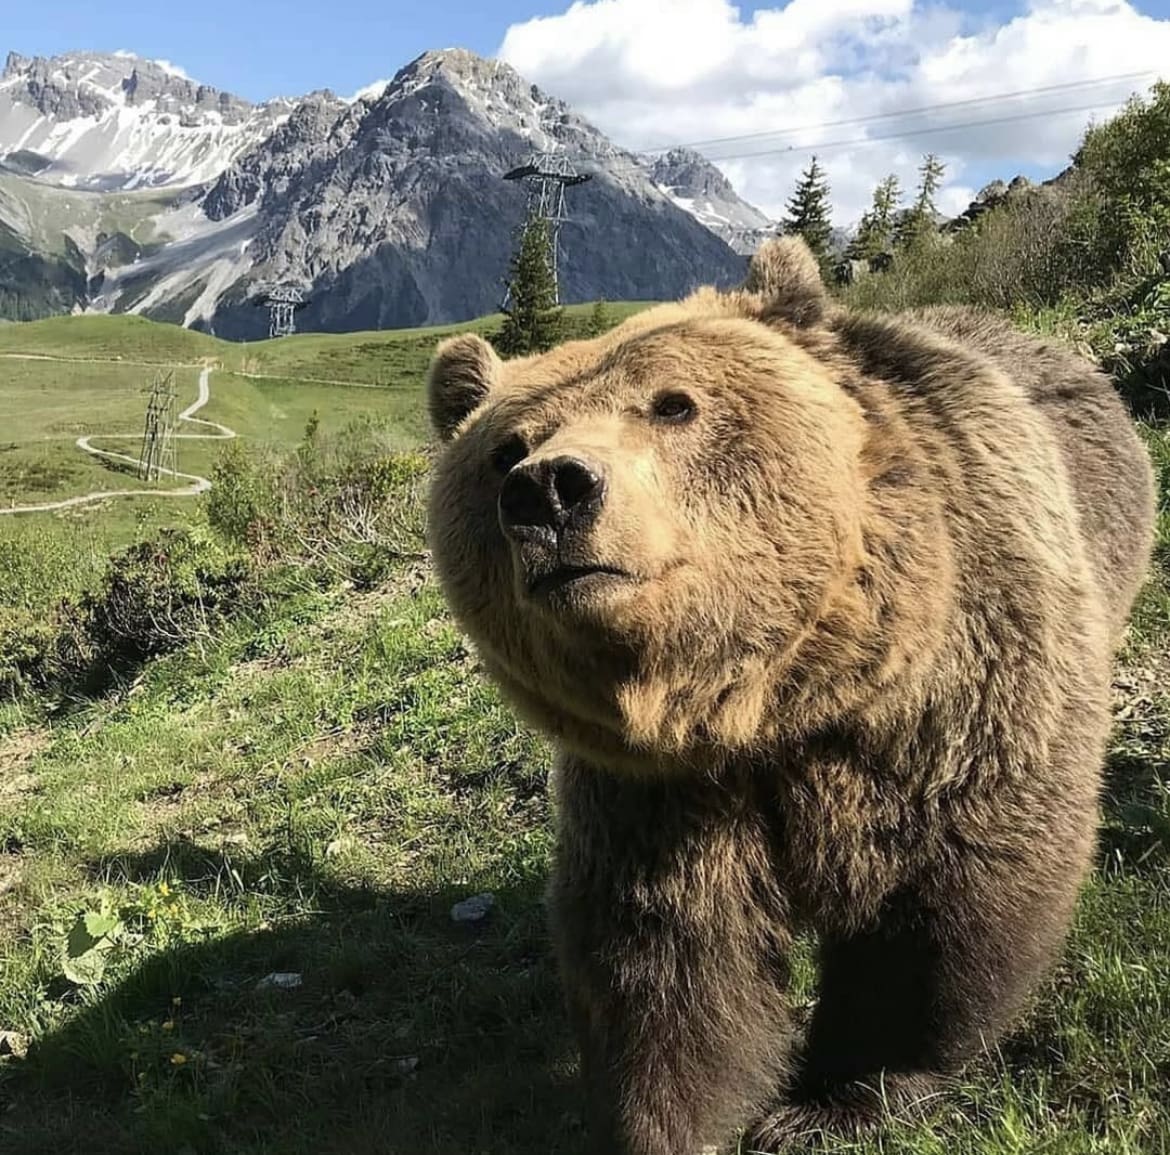 A large grizzly bear approaching a trail cam